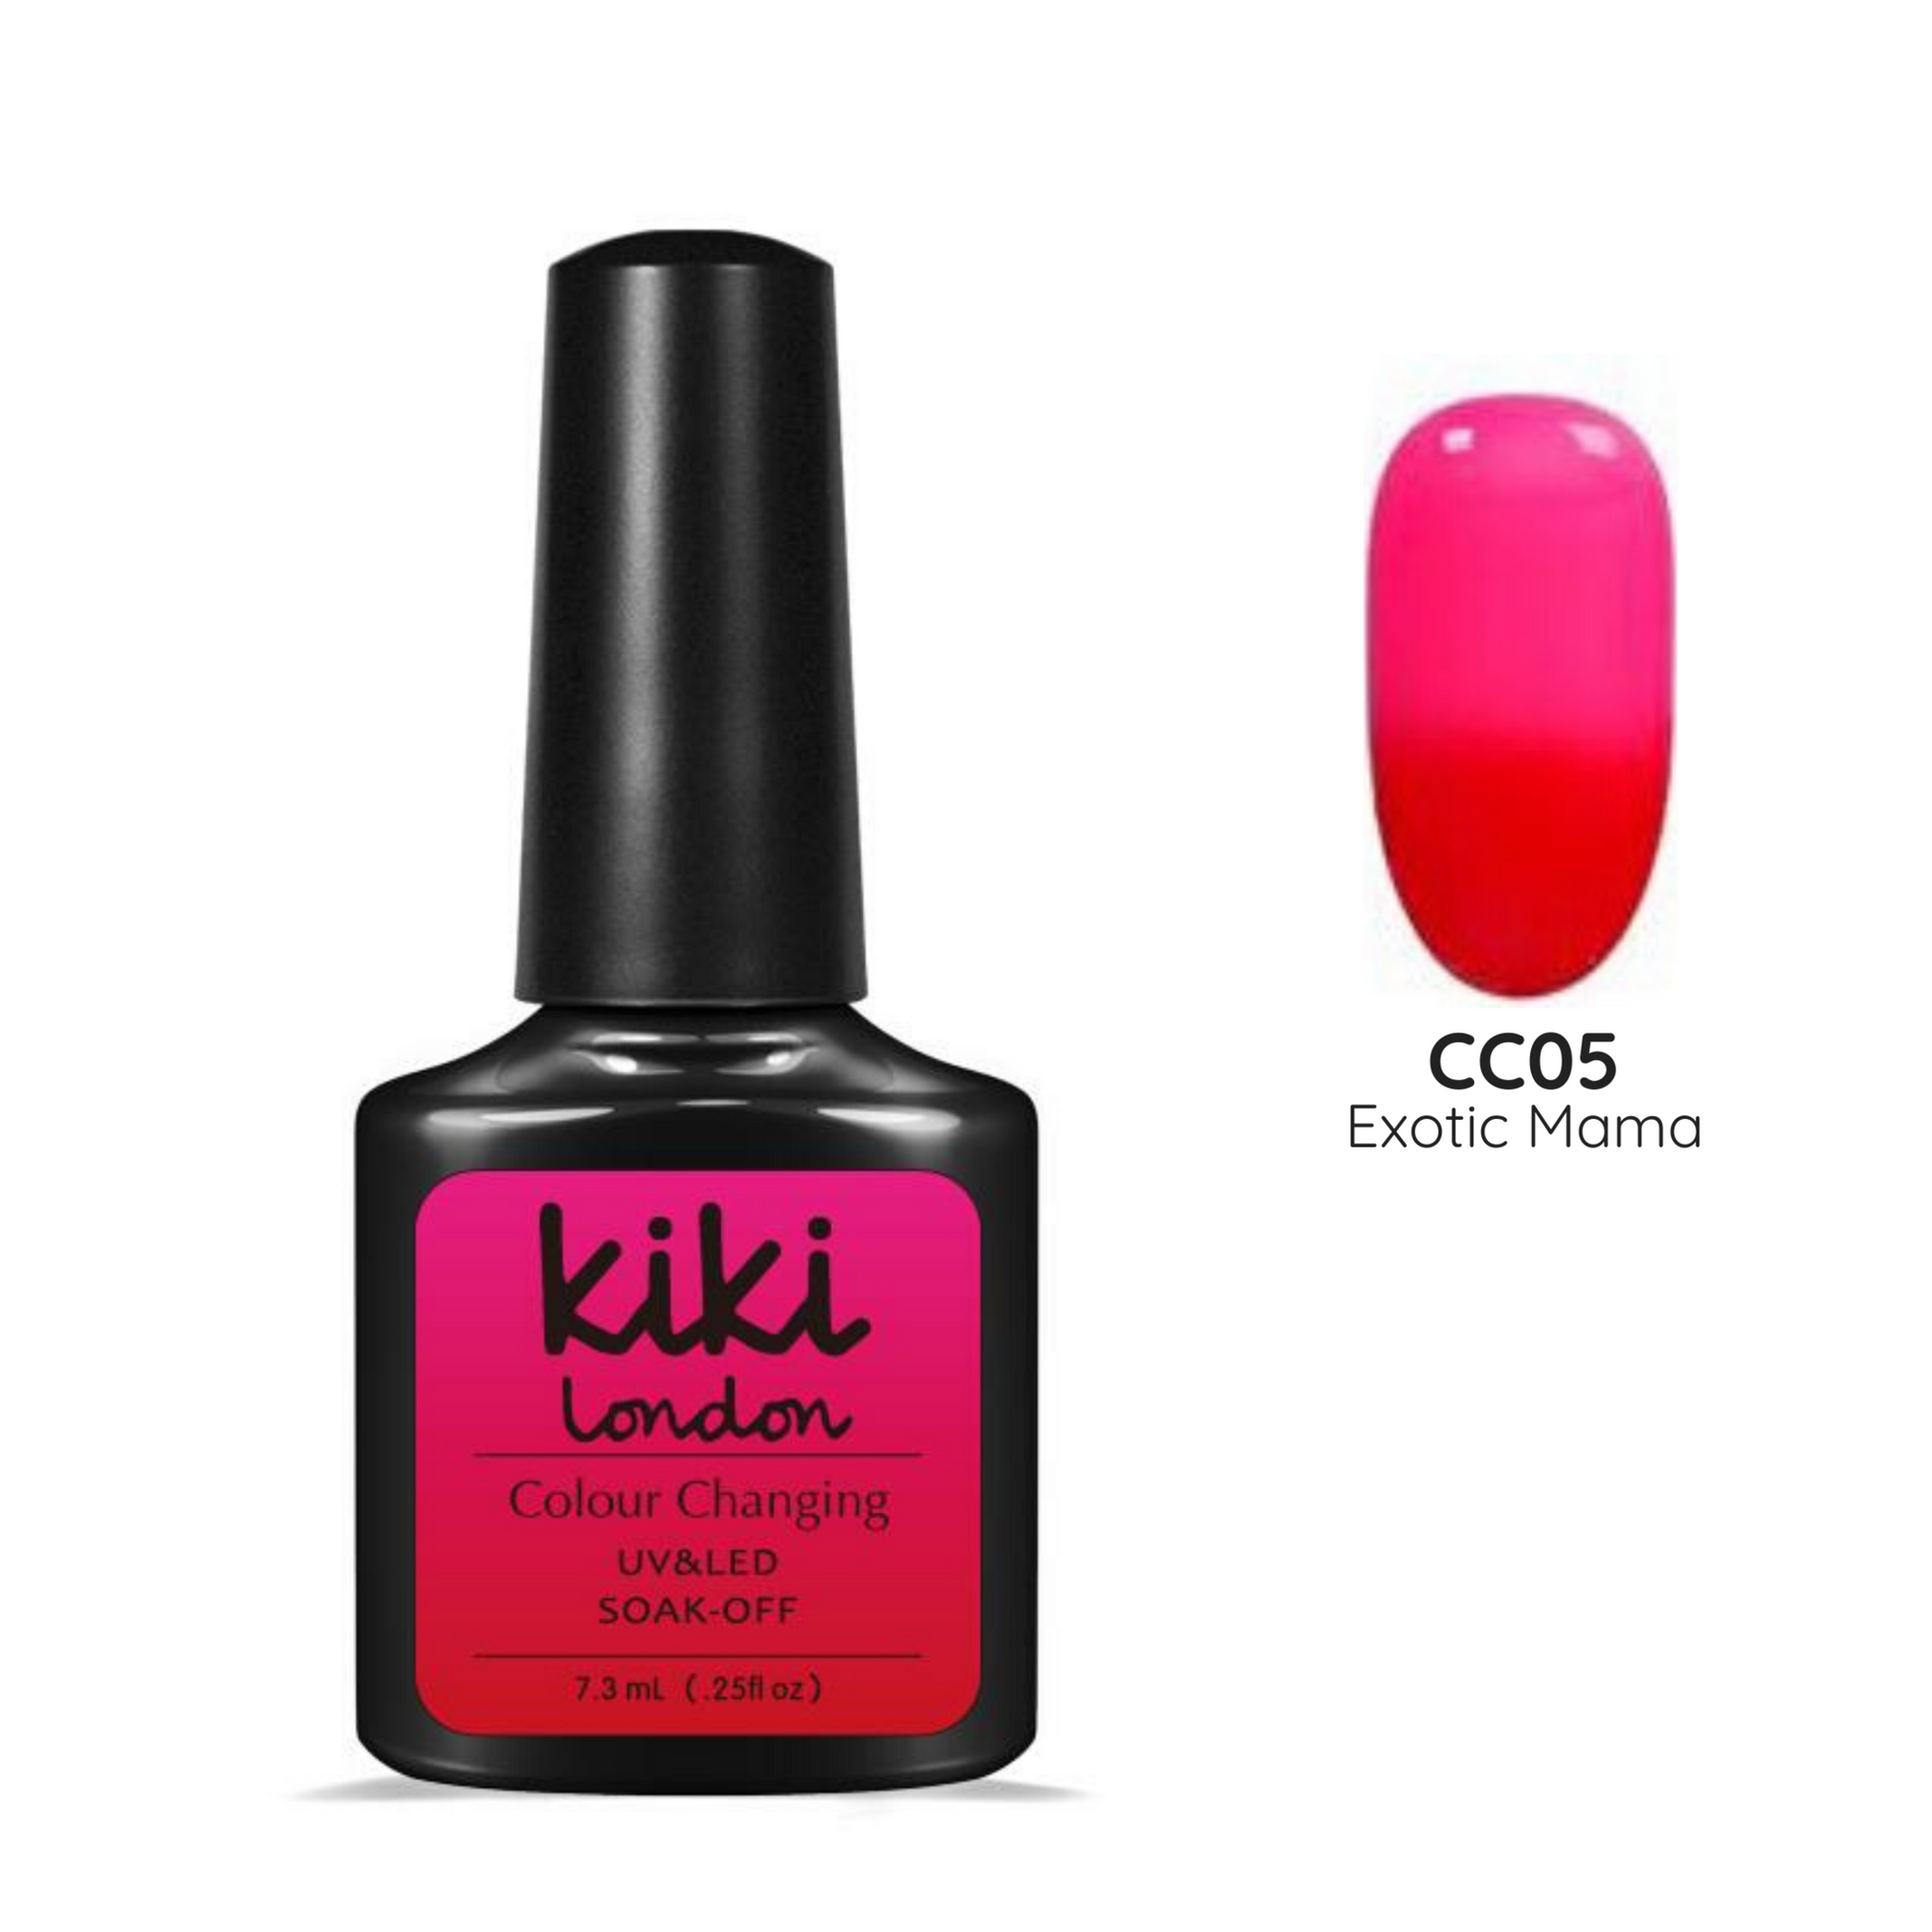 COLOR CHANGING COLLECTION 8stks 7.3ml - Kiki London Benelux